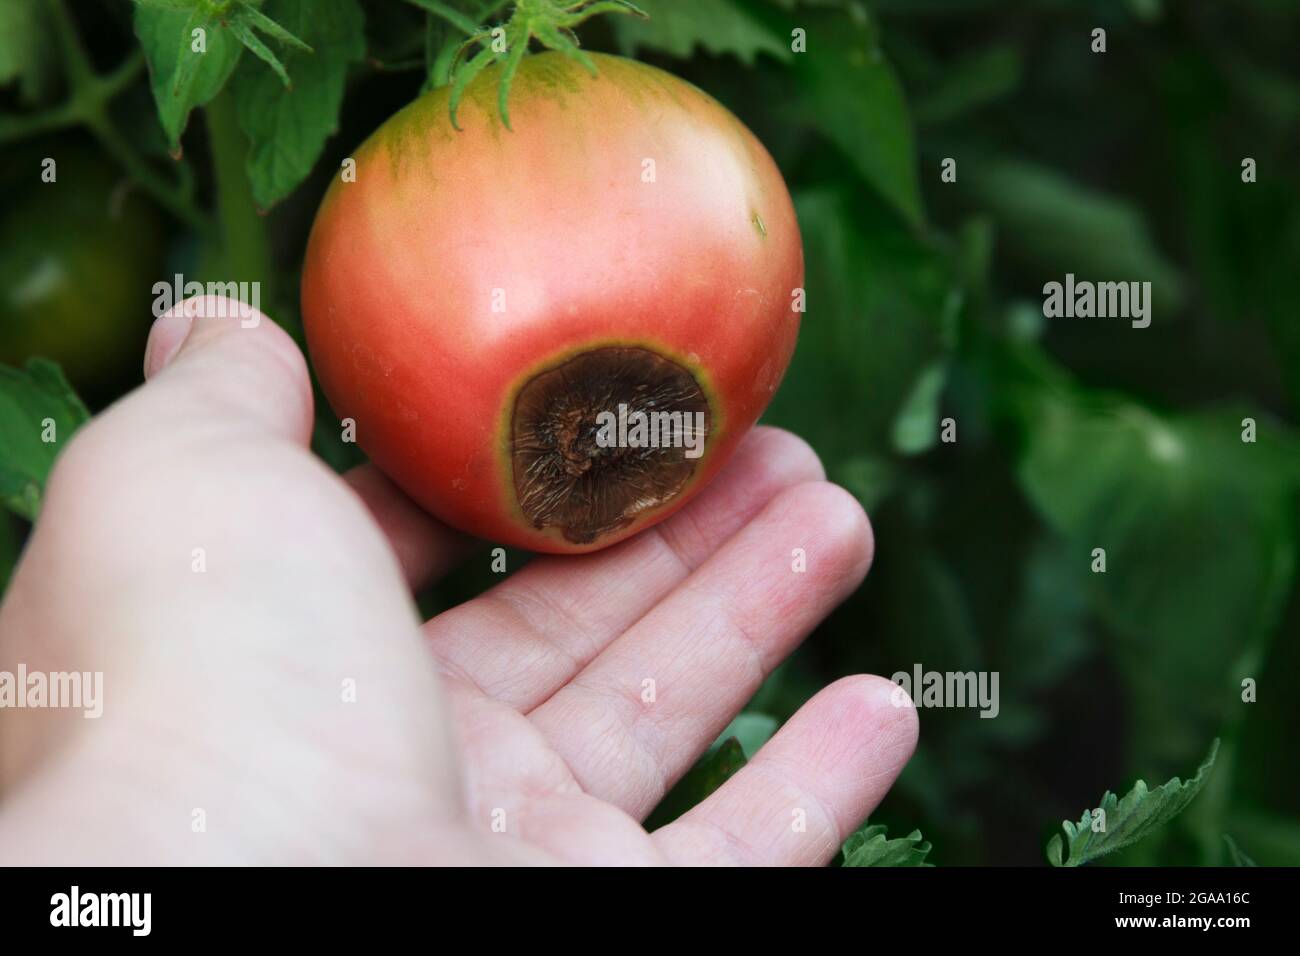 Blossom end rot on the red tomato. Damaged fruit in the farmer hand. Close-up. Disease of tomatoes. Blurred agricultural background. Low key Stock Photo